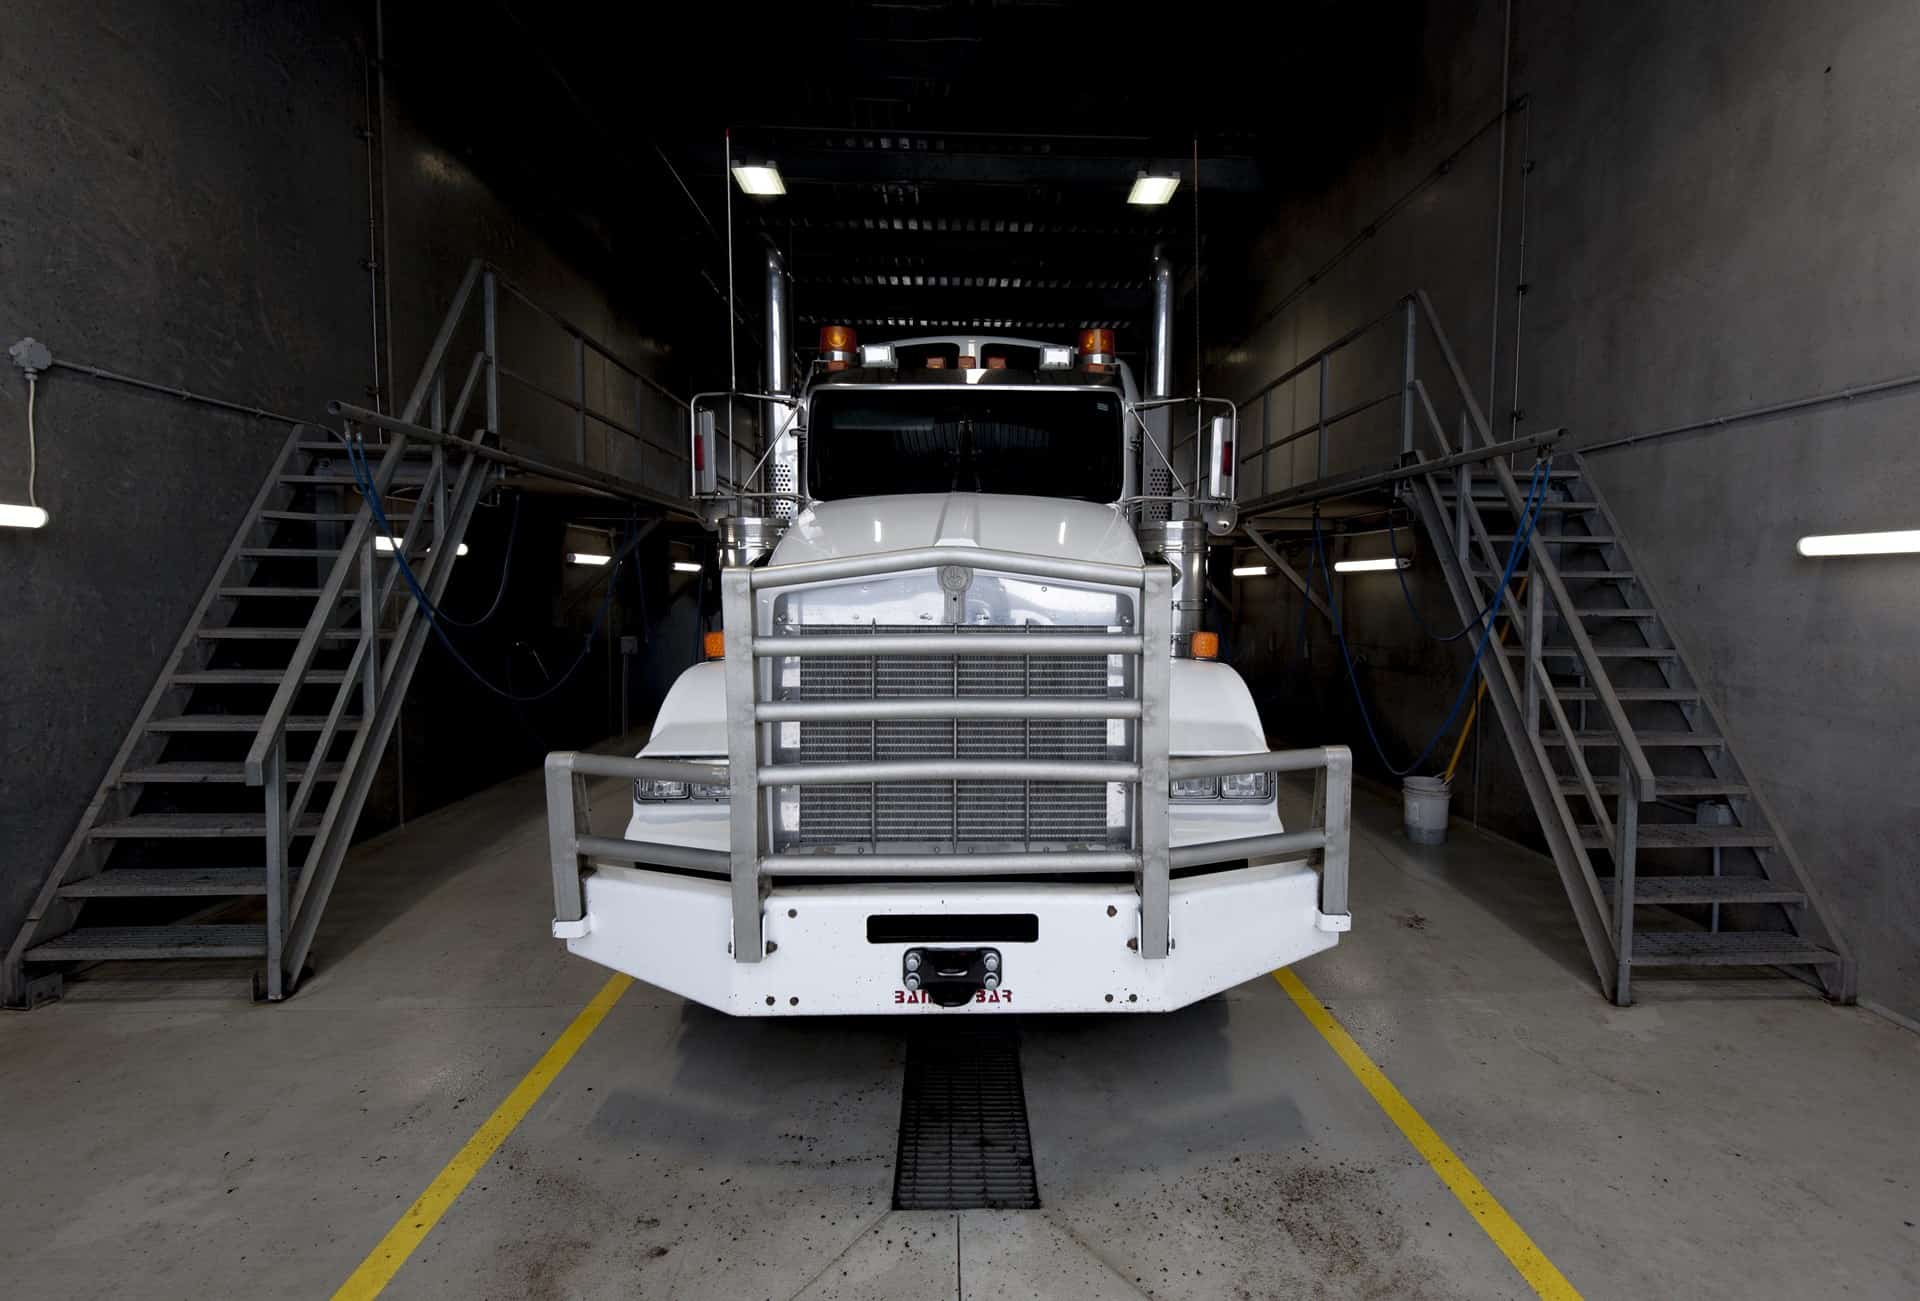 Heavy Duty Truck washing with an Undercarriage Washing System - Edmonton, AB